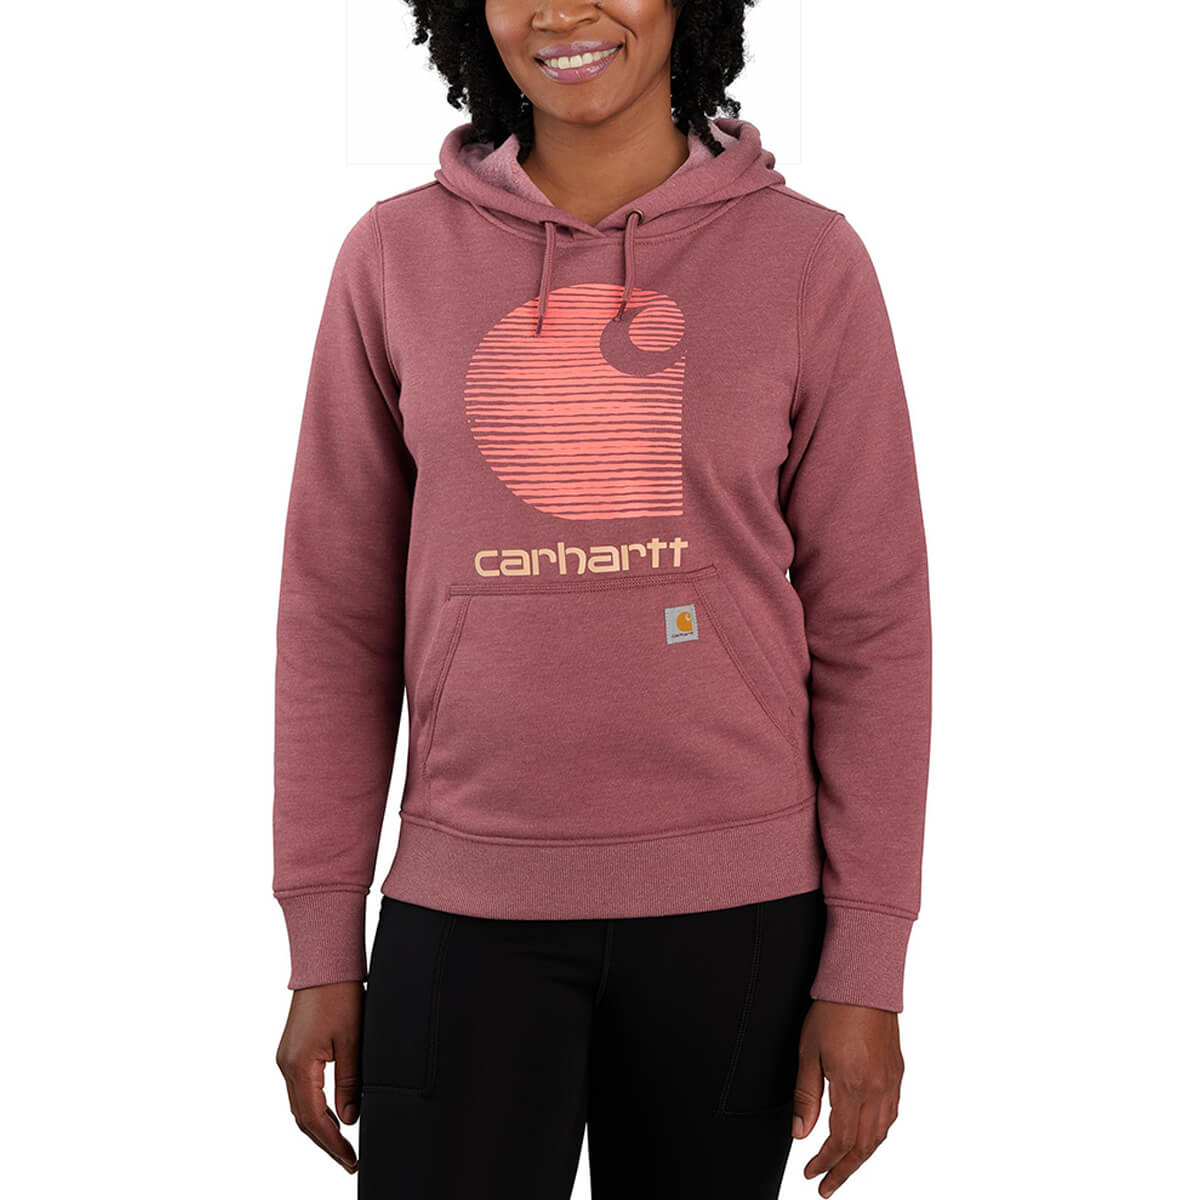 Carhartt Women's Relaxed Fit Midweight Graphic Sweatshirt - Iron